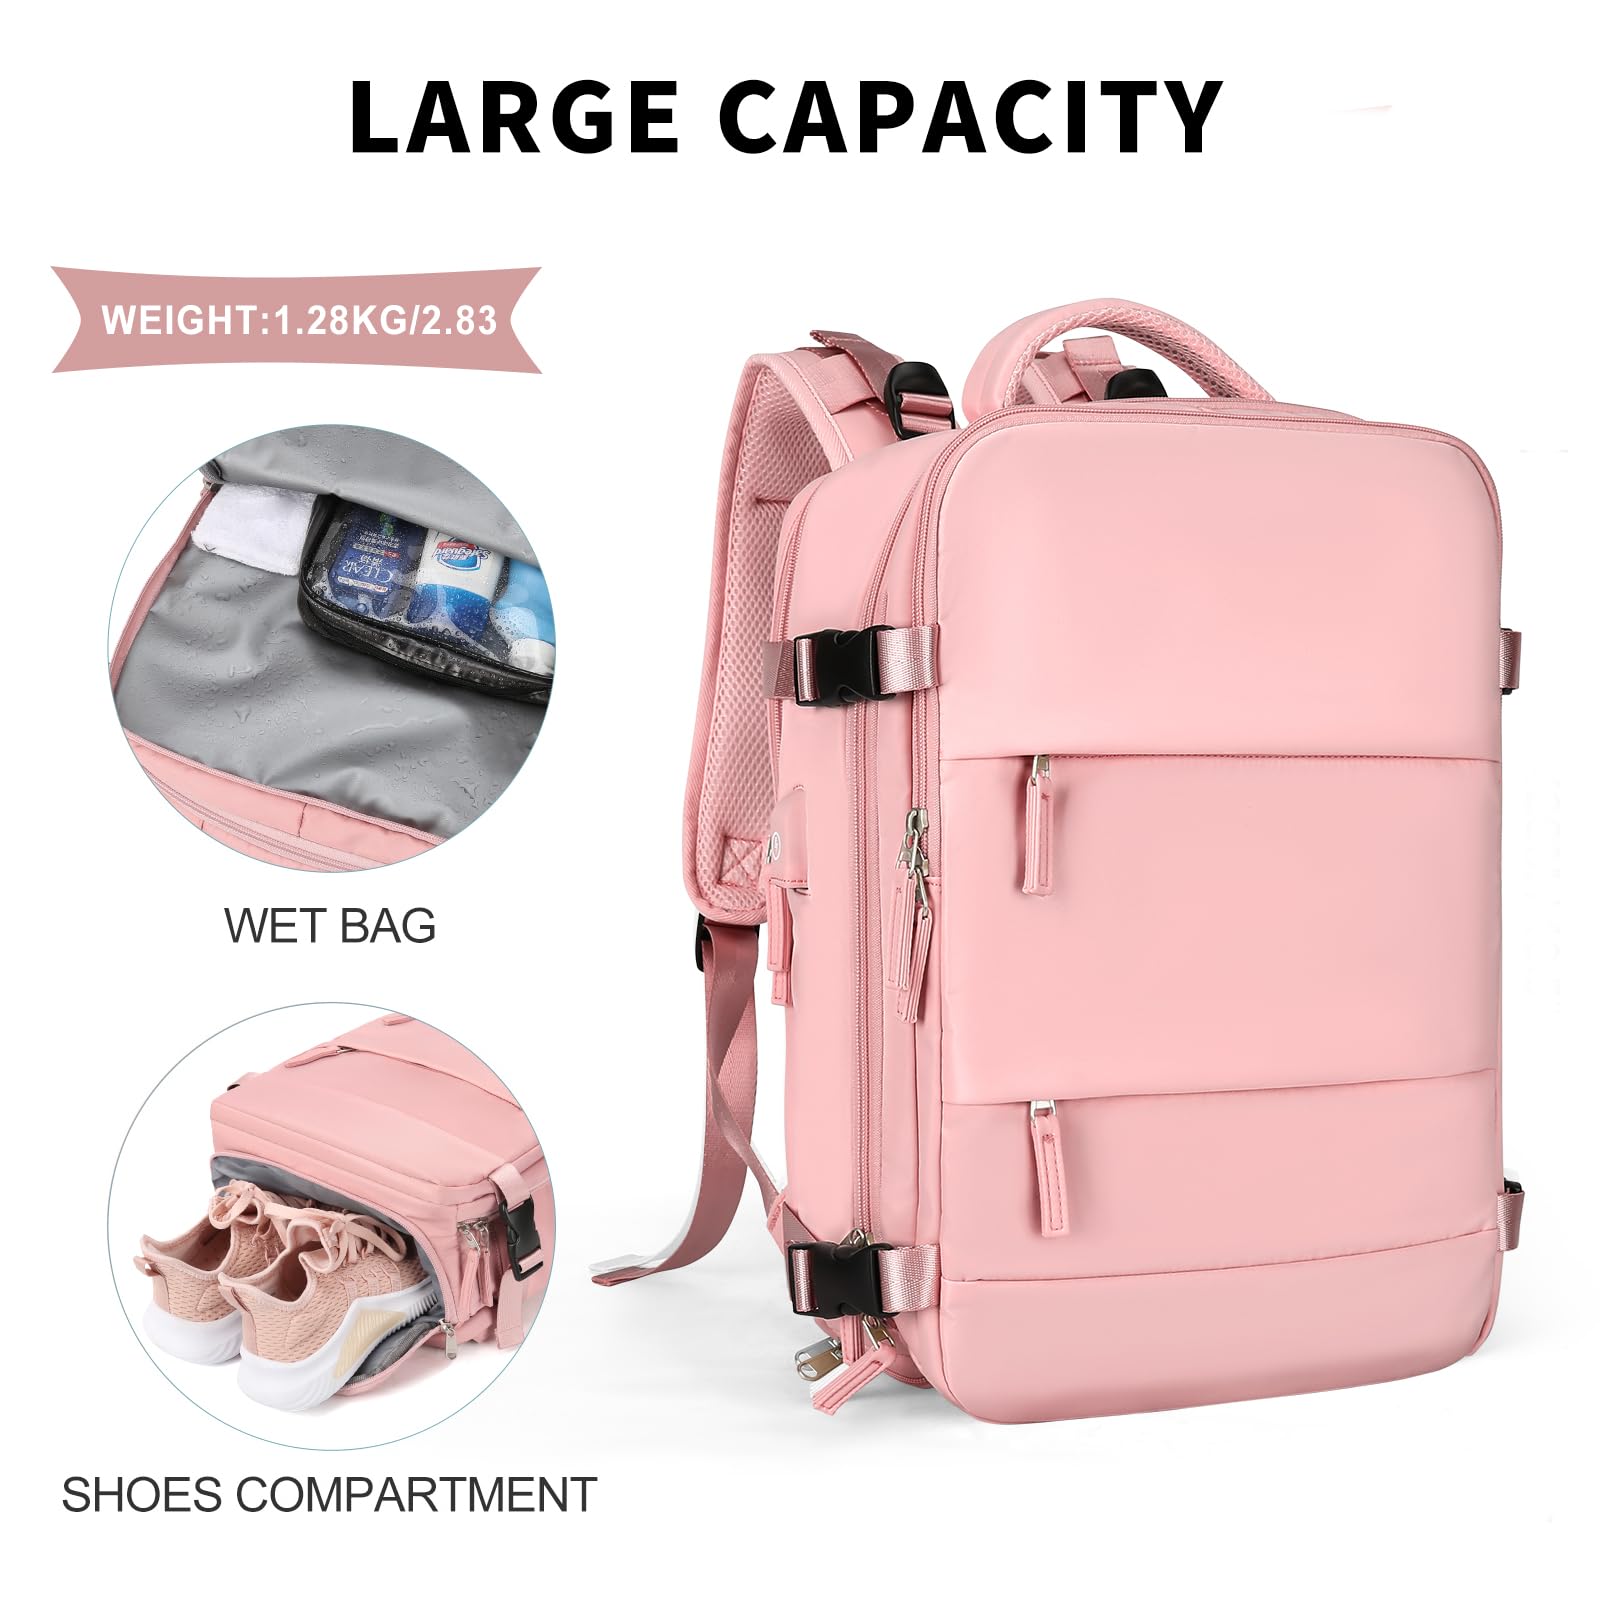 coowoz Large Travel Backpack For Women Men,Carry On Backpack Flight Approved,Hiking Backpack Waterproof Outdoor Sports Rucksack Casual Daypack Fit 15.6 Inch Laptop Shoes Compartment